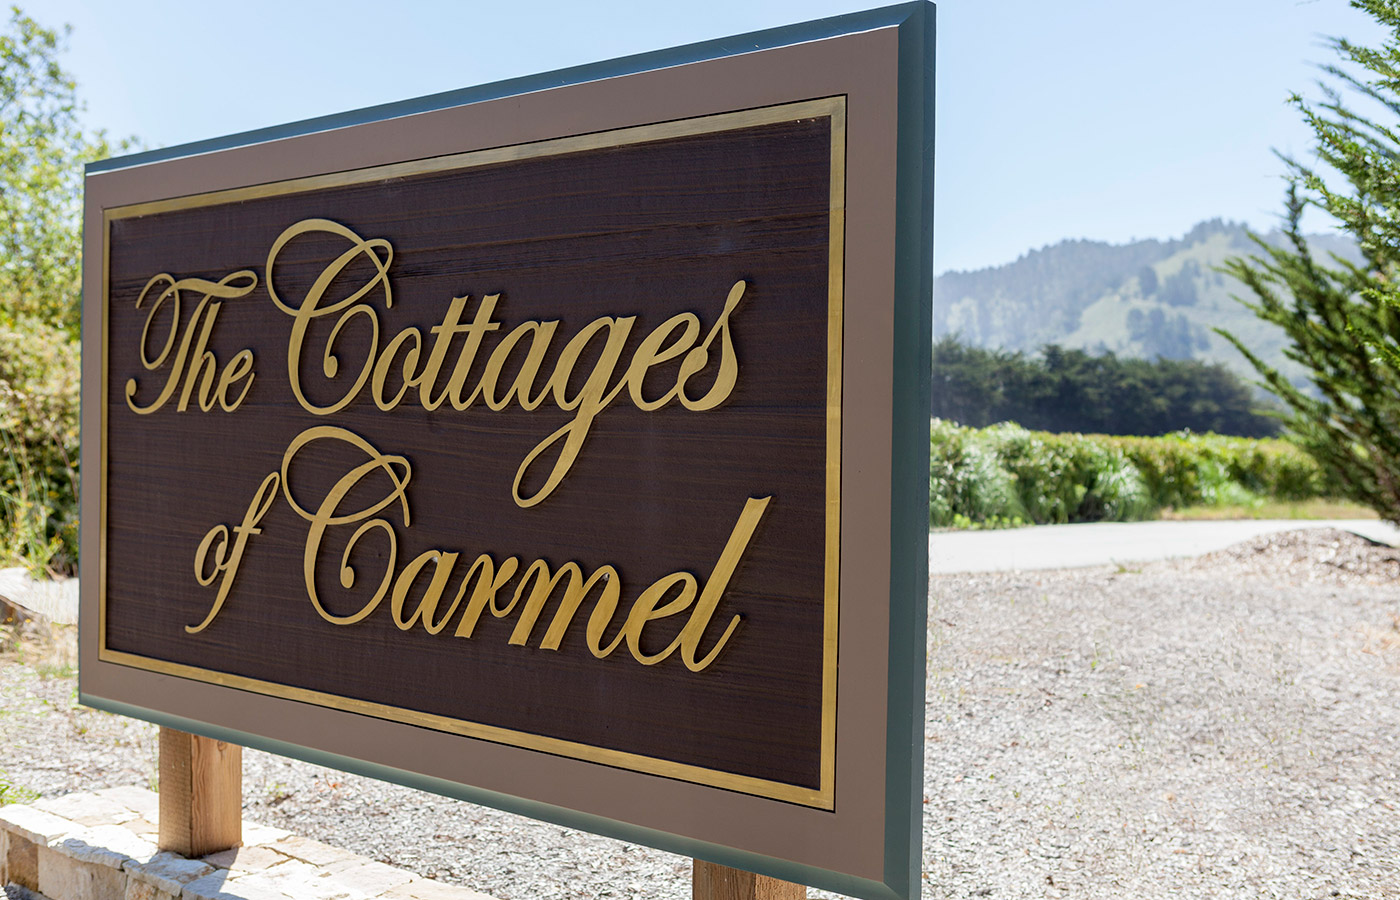 The exterior sign of the Cottages of Carmel